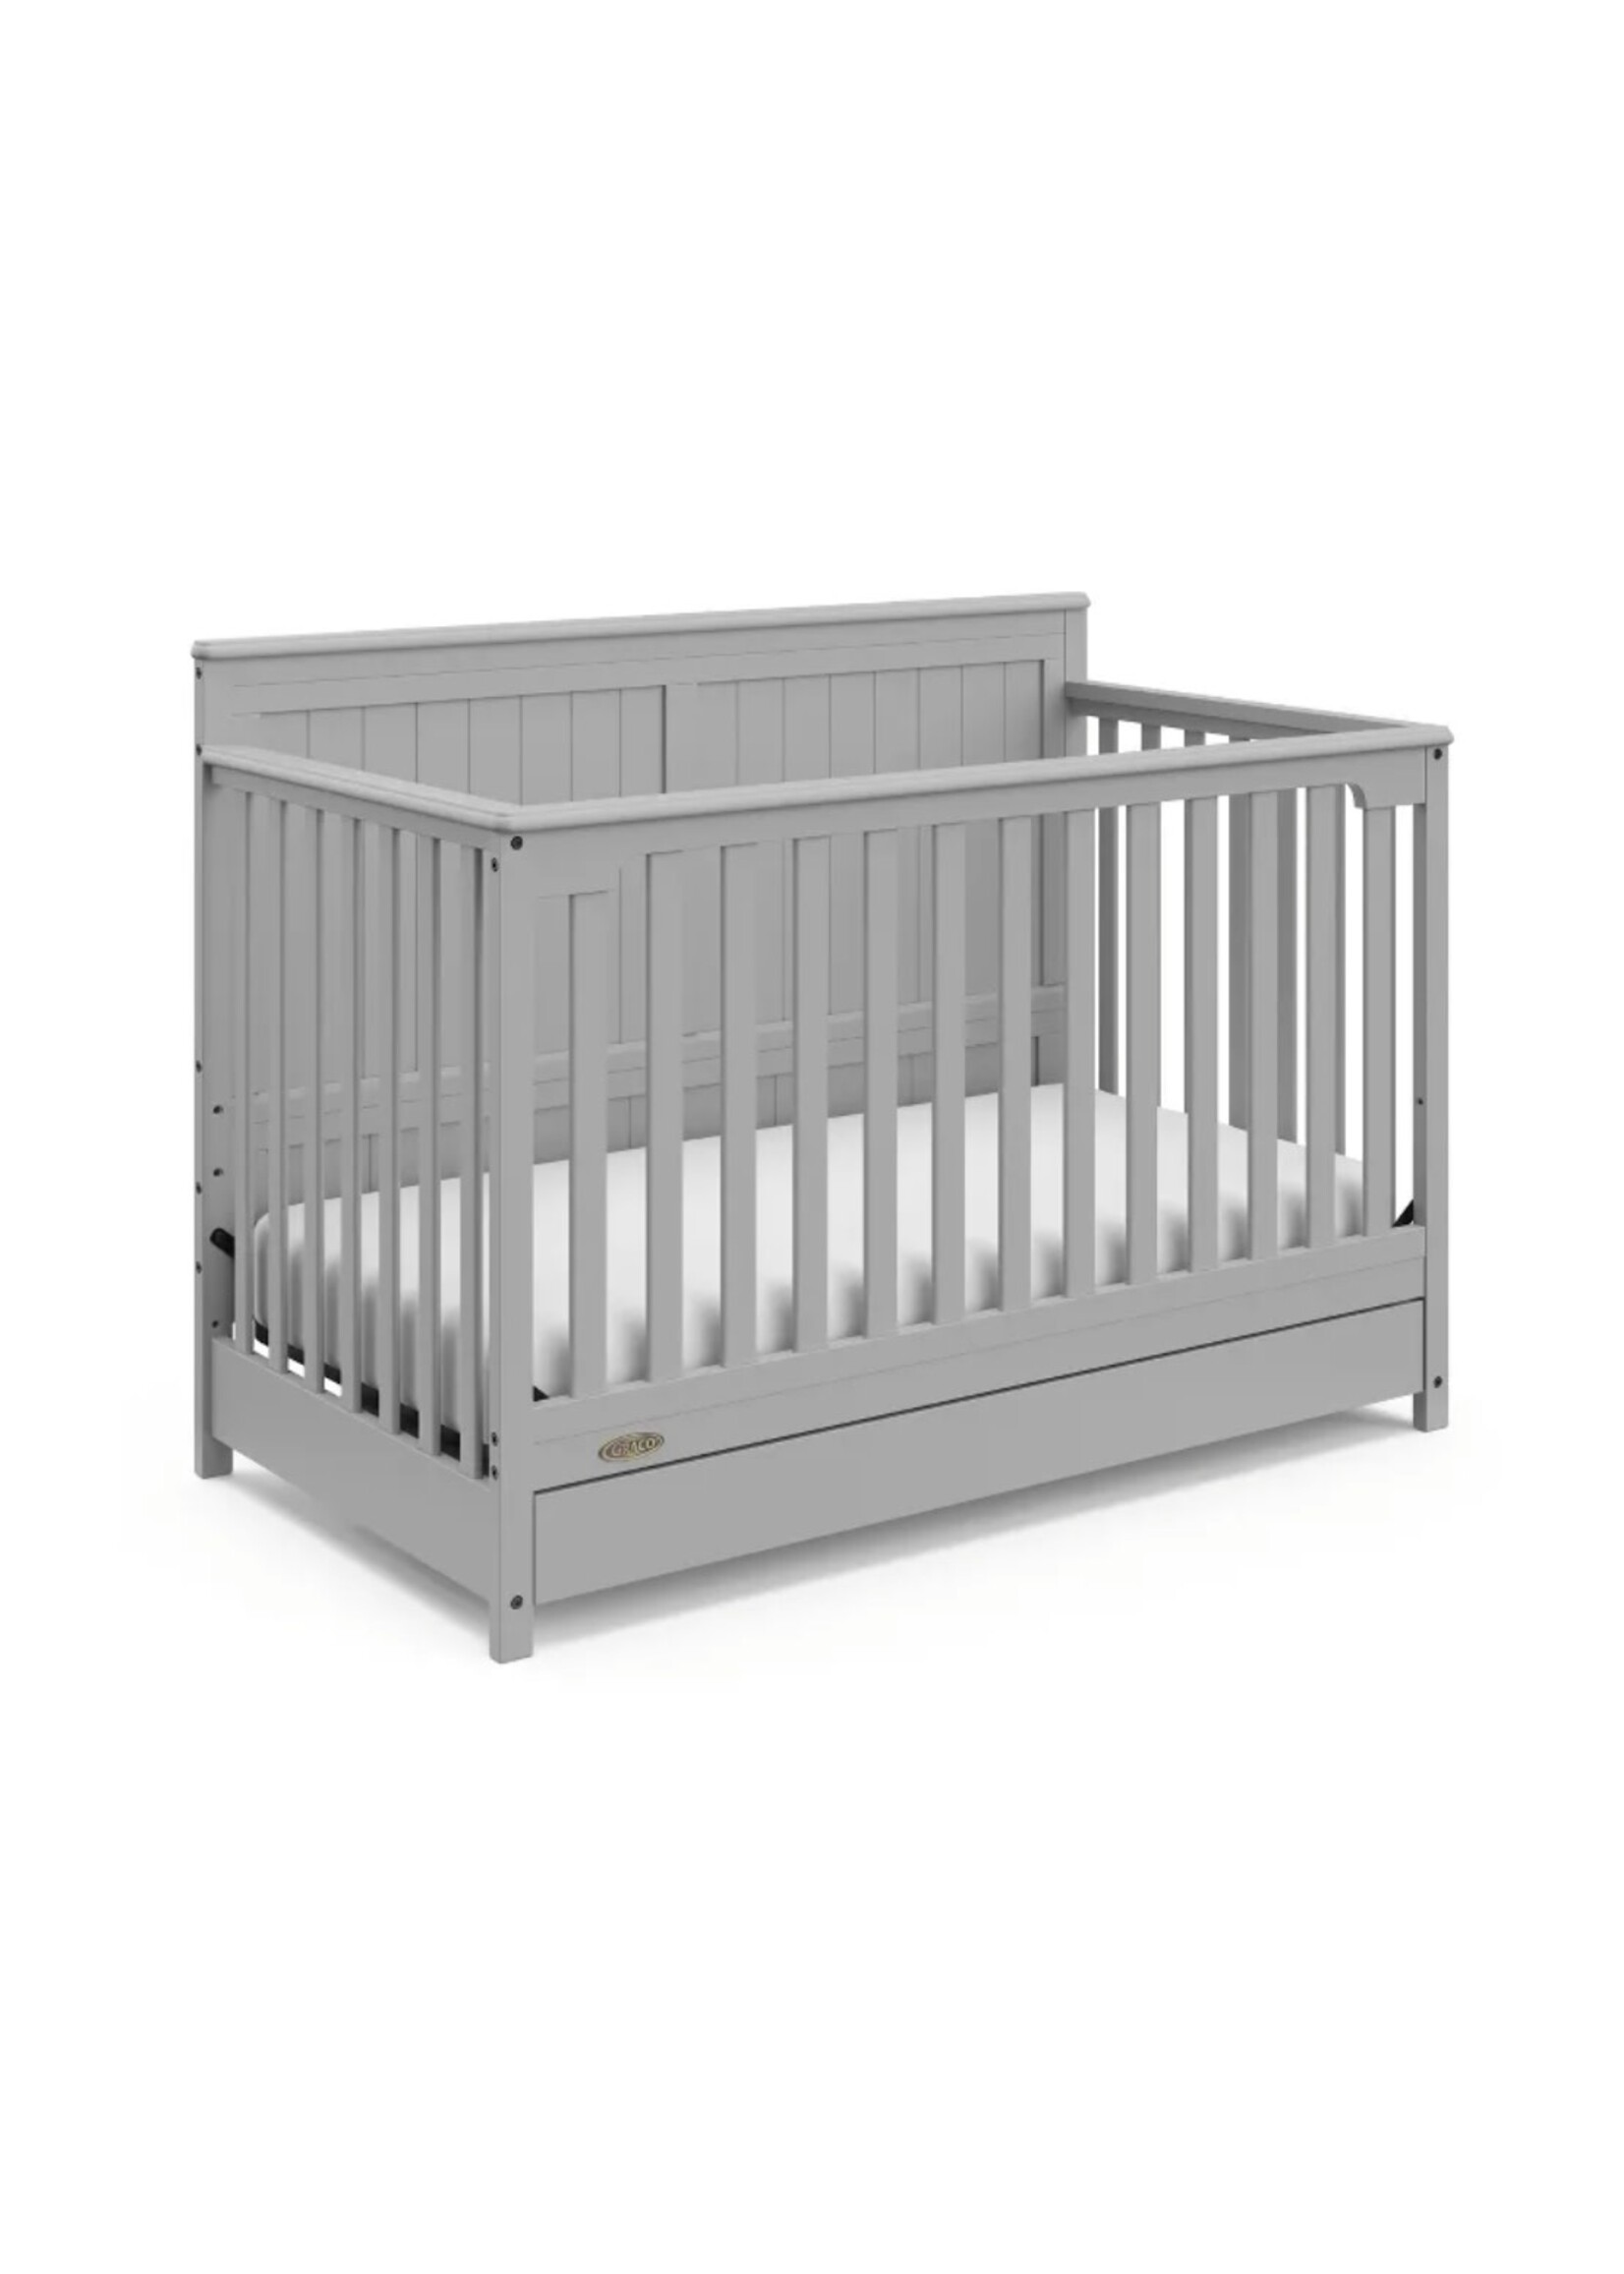 Graco Hadley 5-in-1 Convertible Crib with Drawer - Pebble Gray